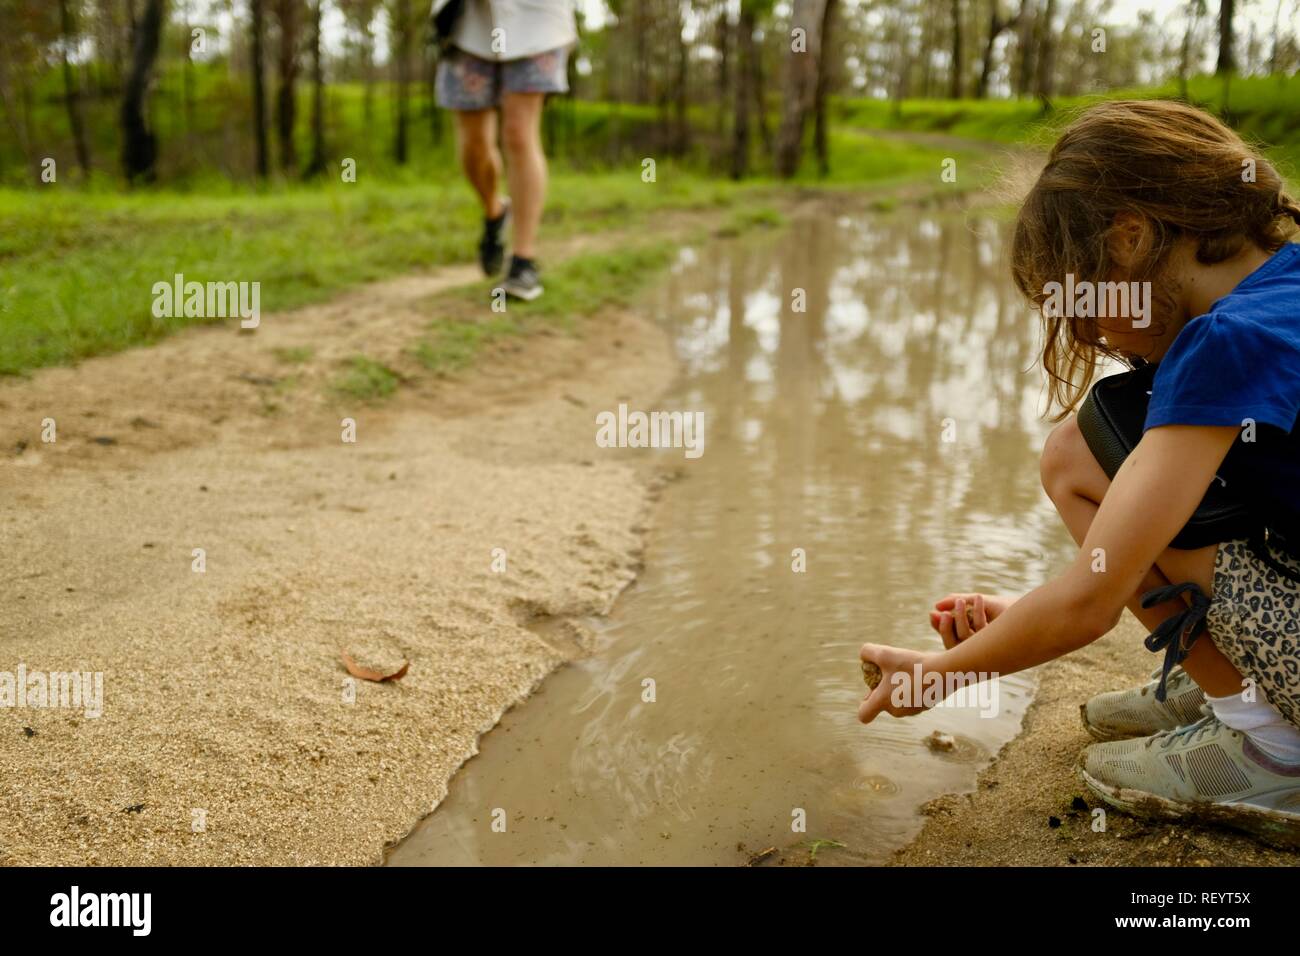 A young girl playing in a muddy puddle on a four wheel drive track through a forest, Mia Mia State Forest, Queensland, Australia Stock Photo